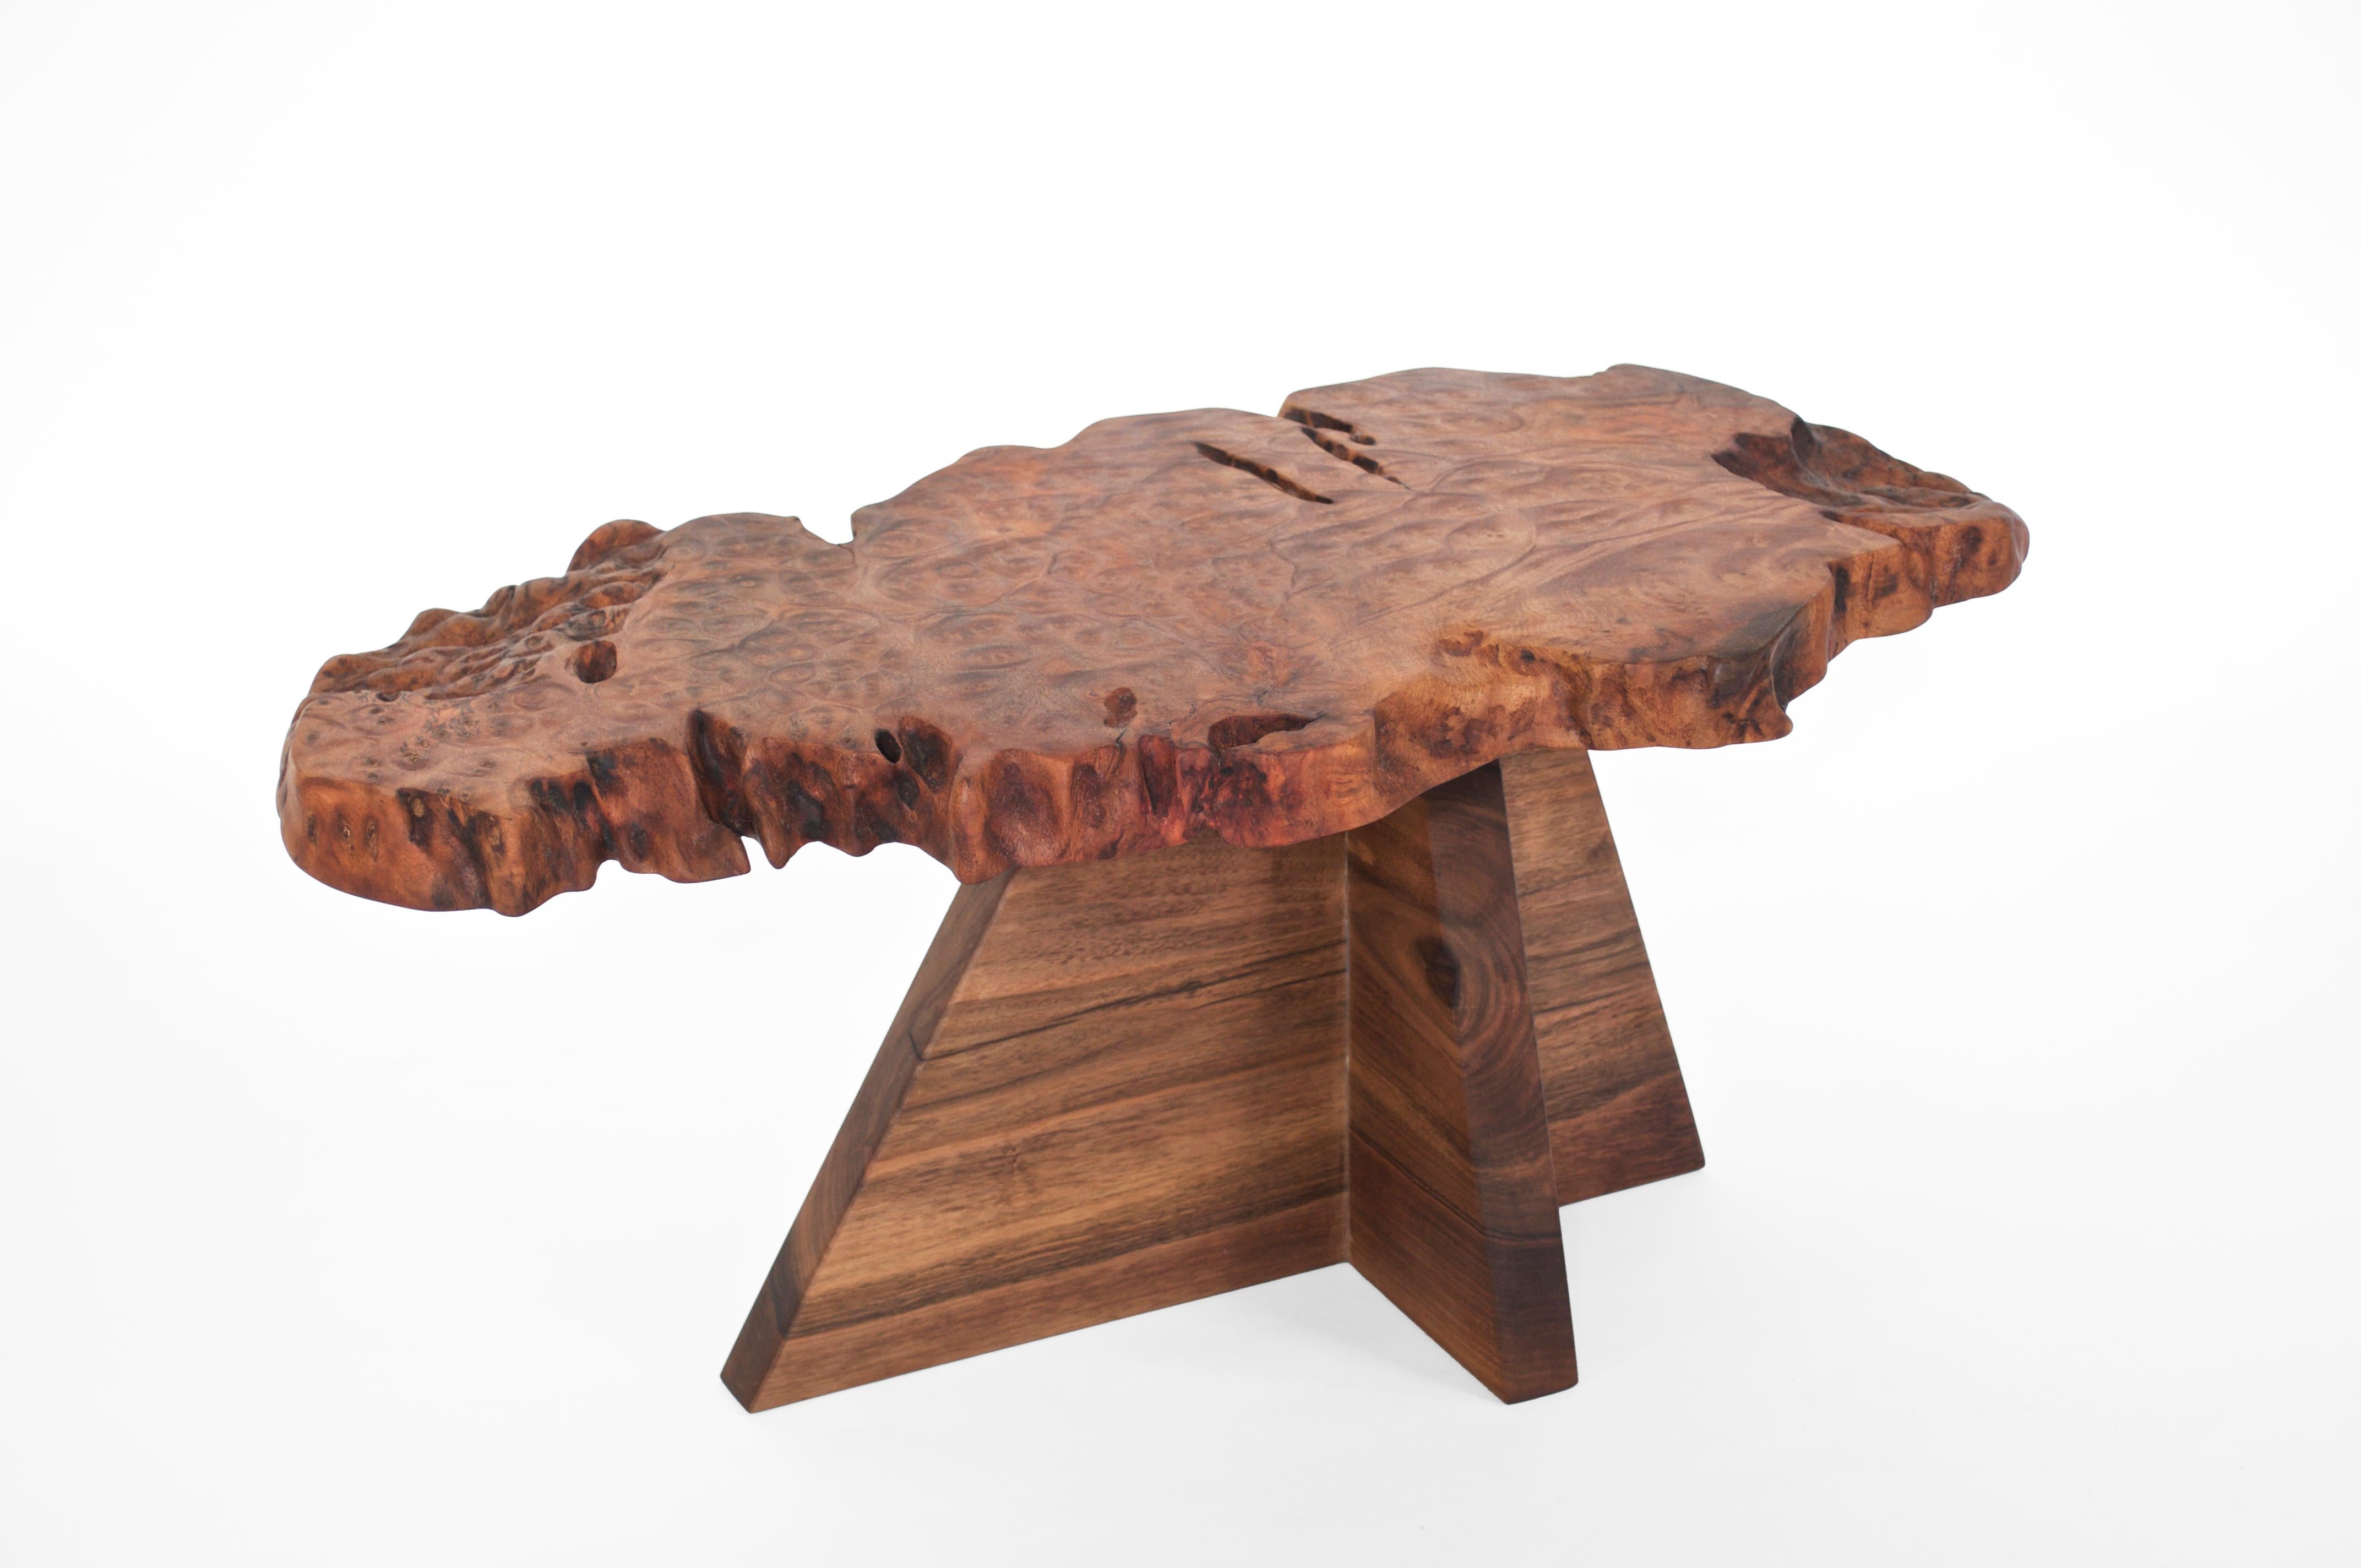 Unique signed table by Jörg Pietschmann T2581 
Materials: Afzelia, Europe walnut, polished oil finish
Measures: H 37,5 x W 90 x D 47 cm 

In Pietschmann’s sculptures, trees that for centuries were part of a landscape and founded in primordial forces